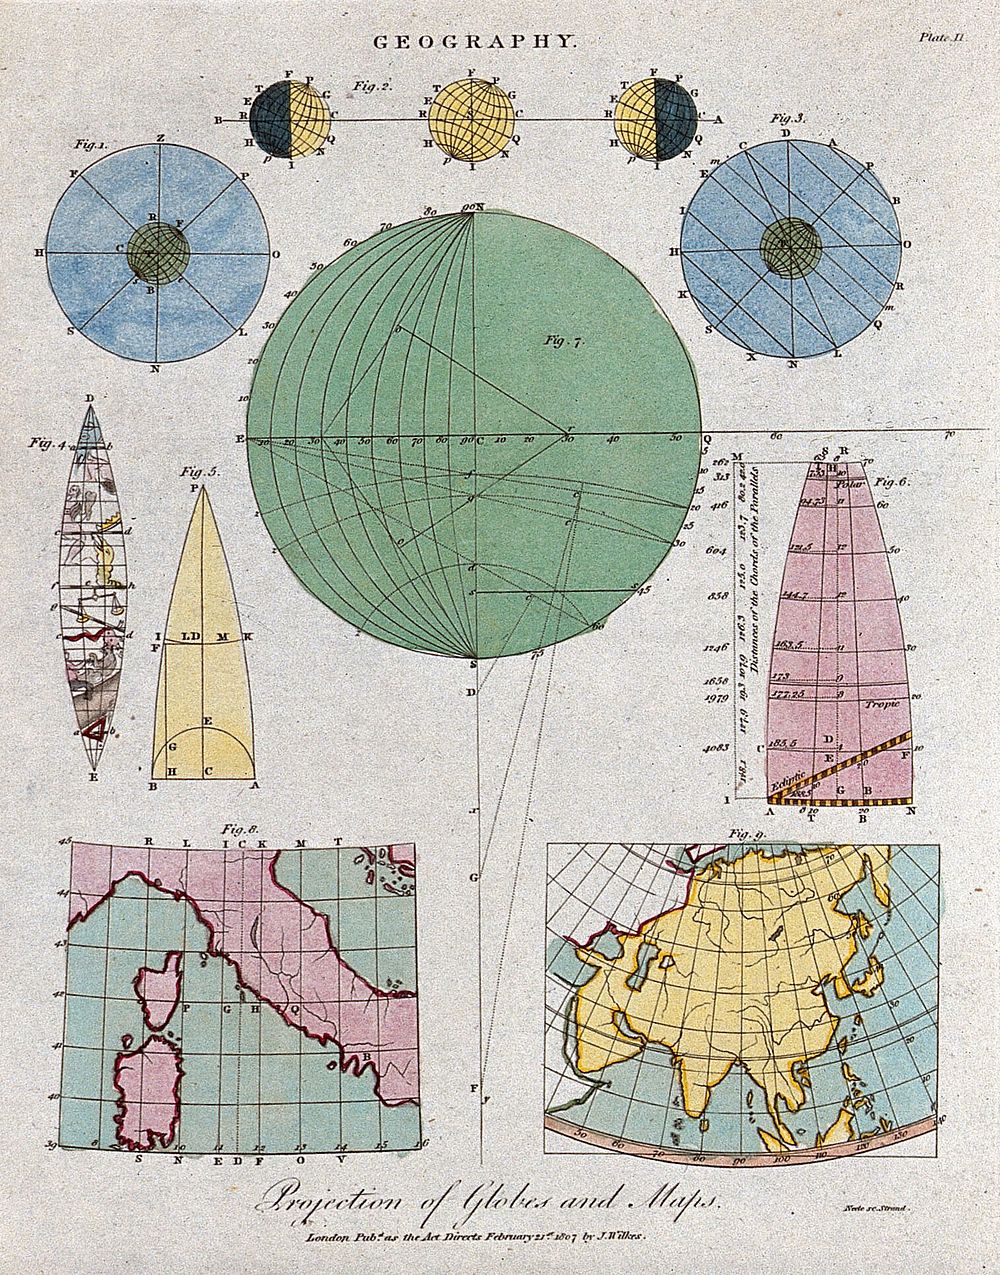 Geography: the earth, and methods of mapping. Coloured engraving by Neele, 1807.